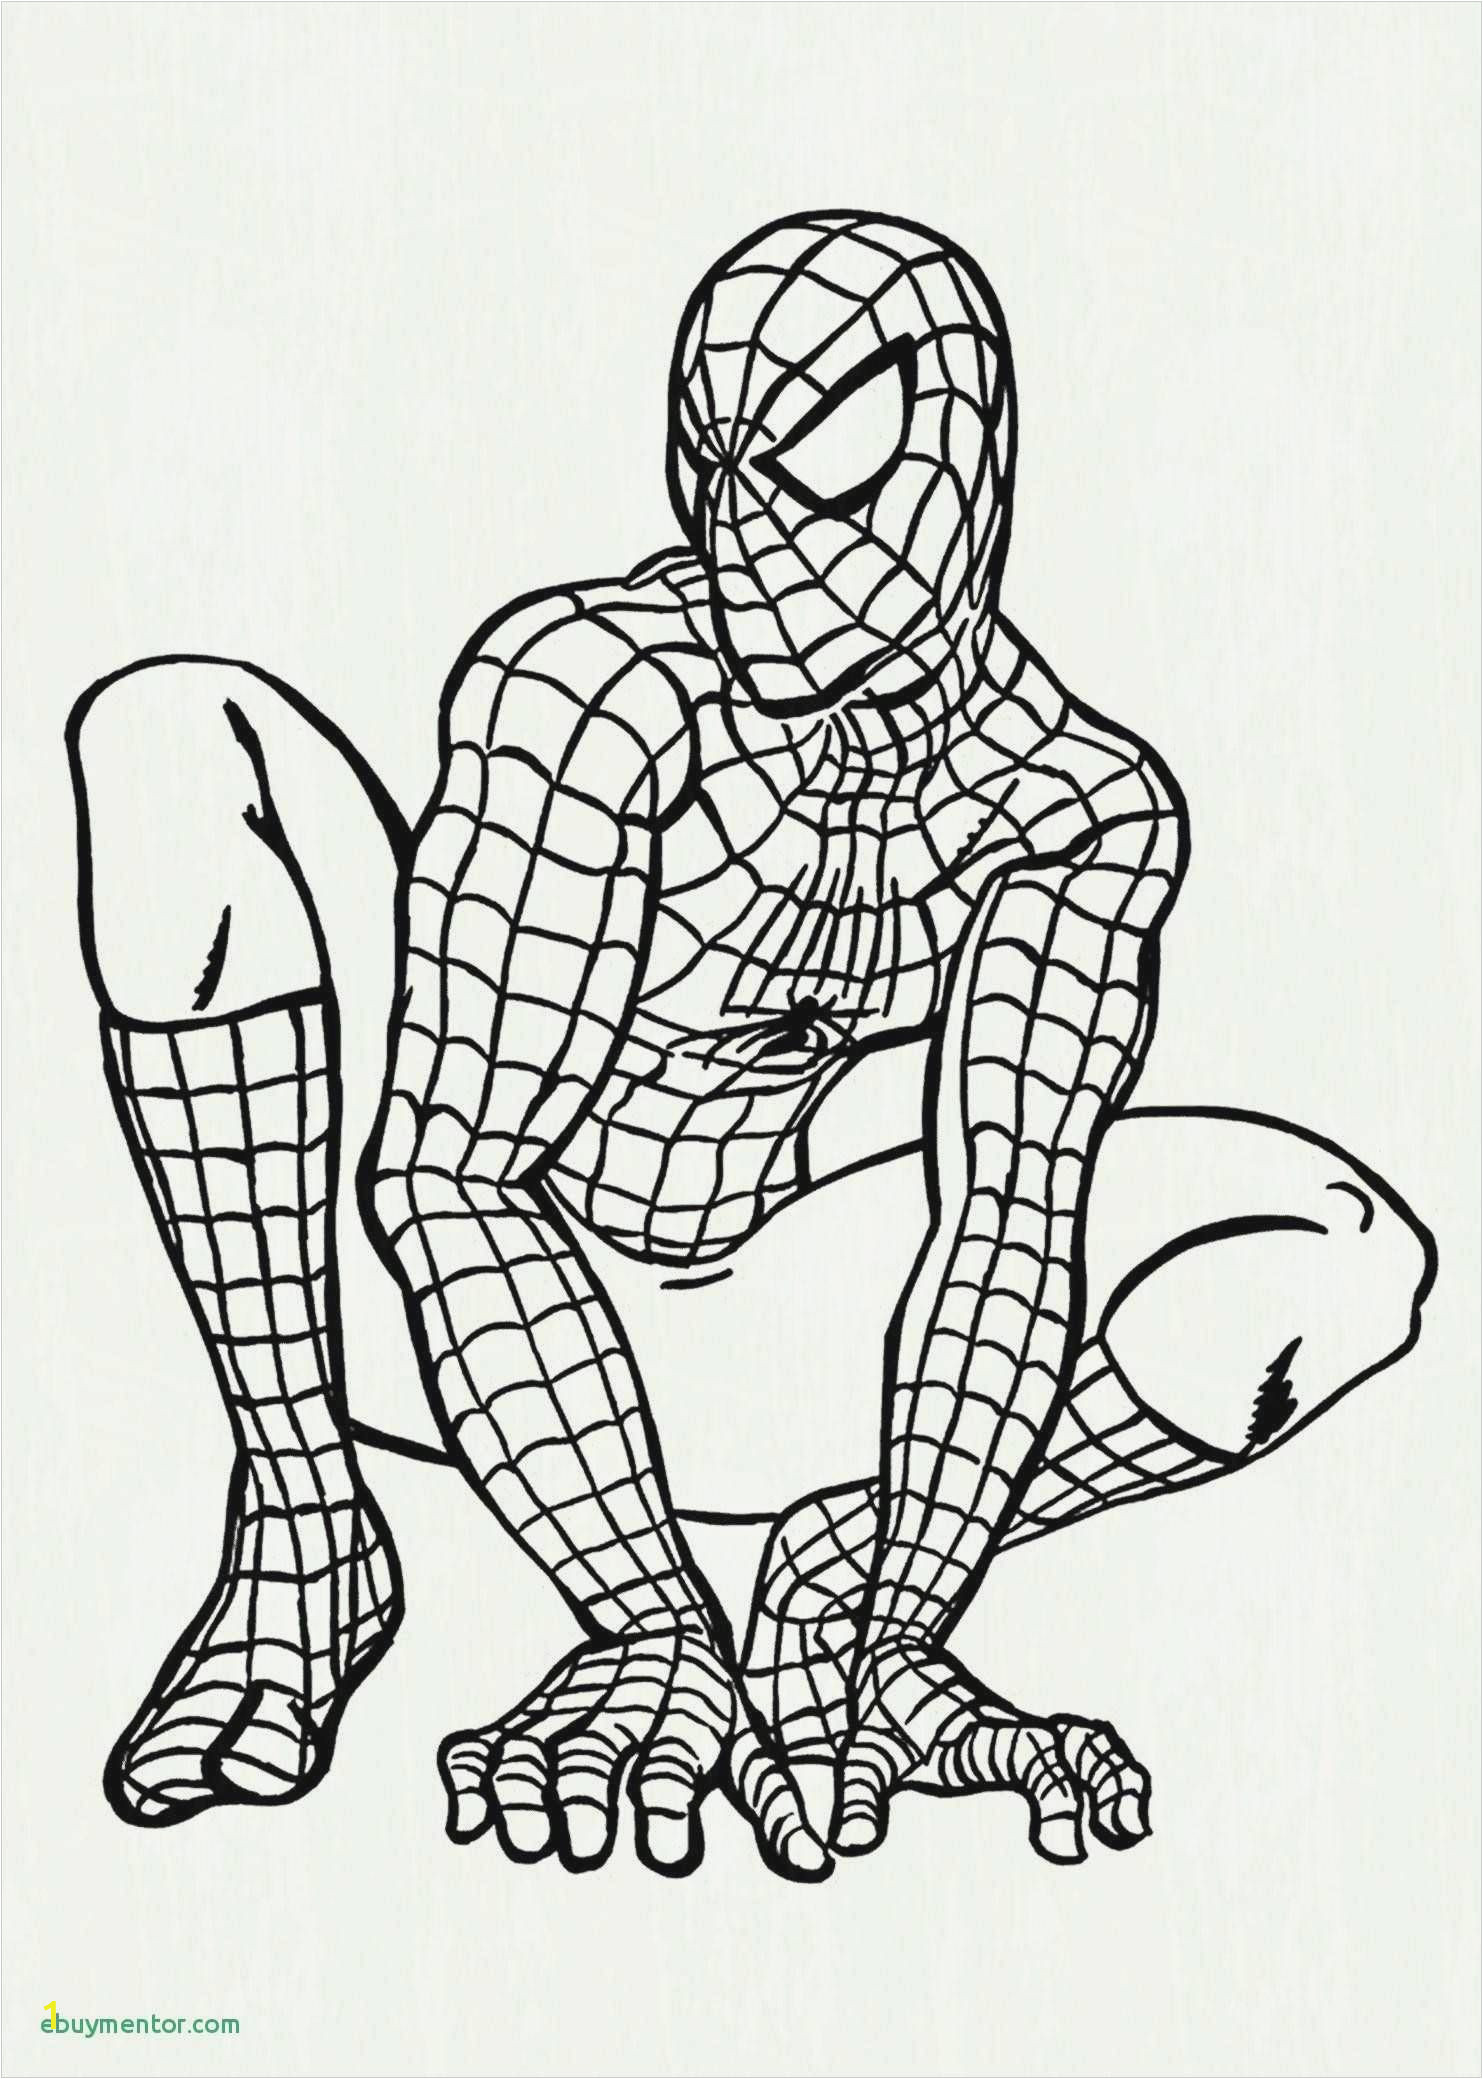 Spider Man Homecoming Coloring Pages 5 Free Coloring Games Printable In 2020 with Images